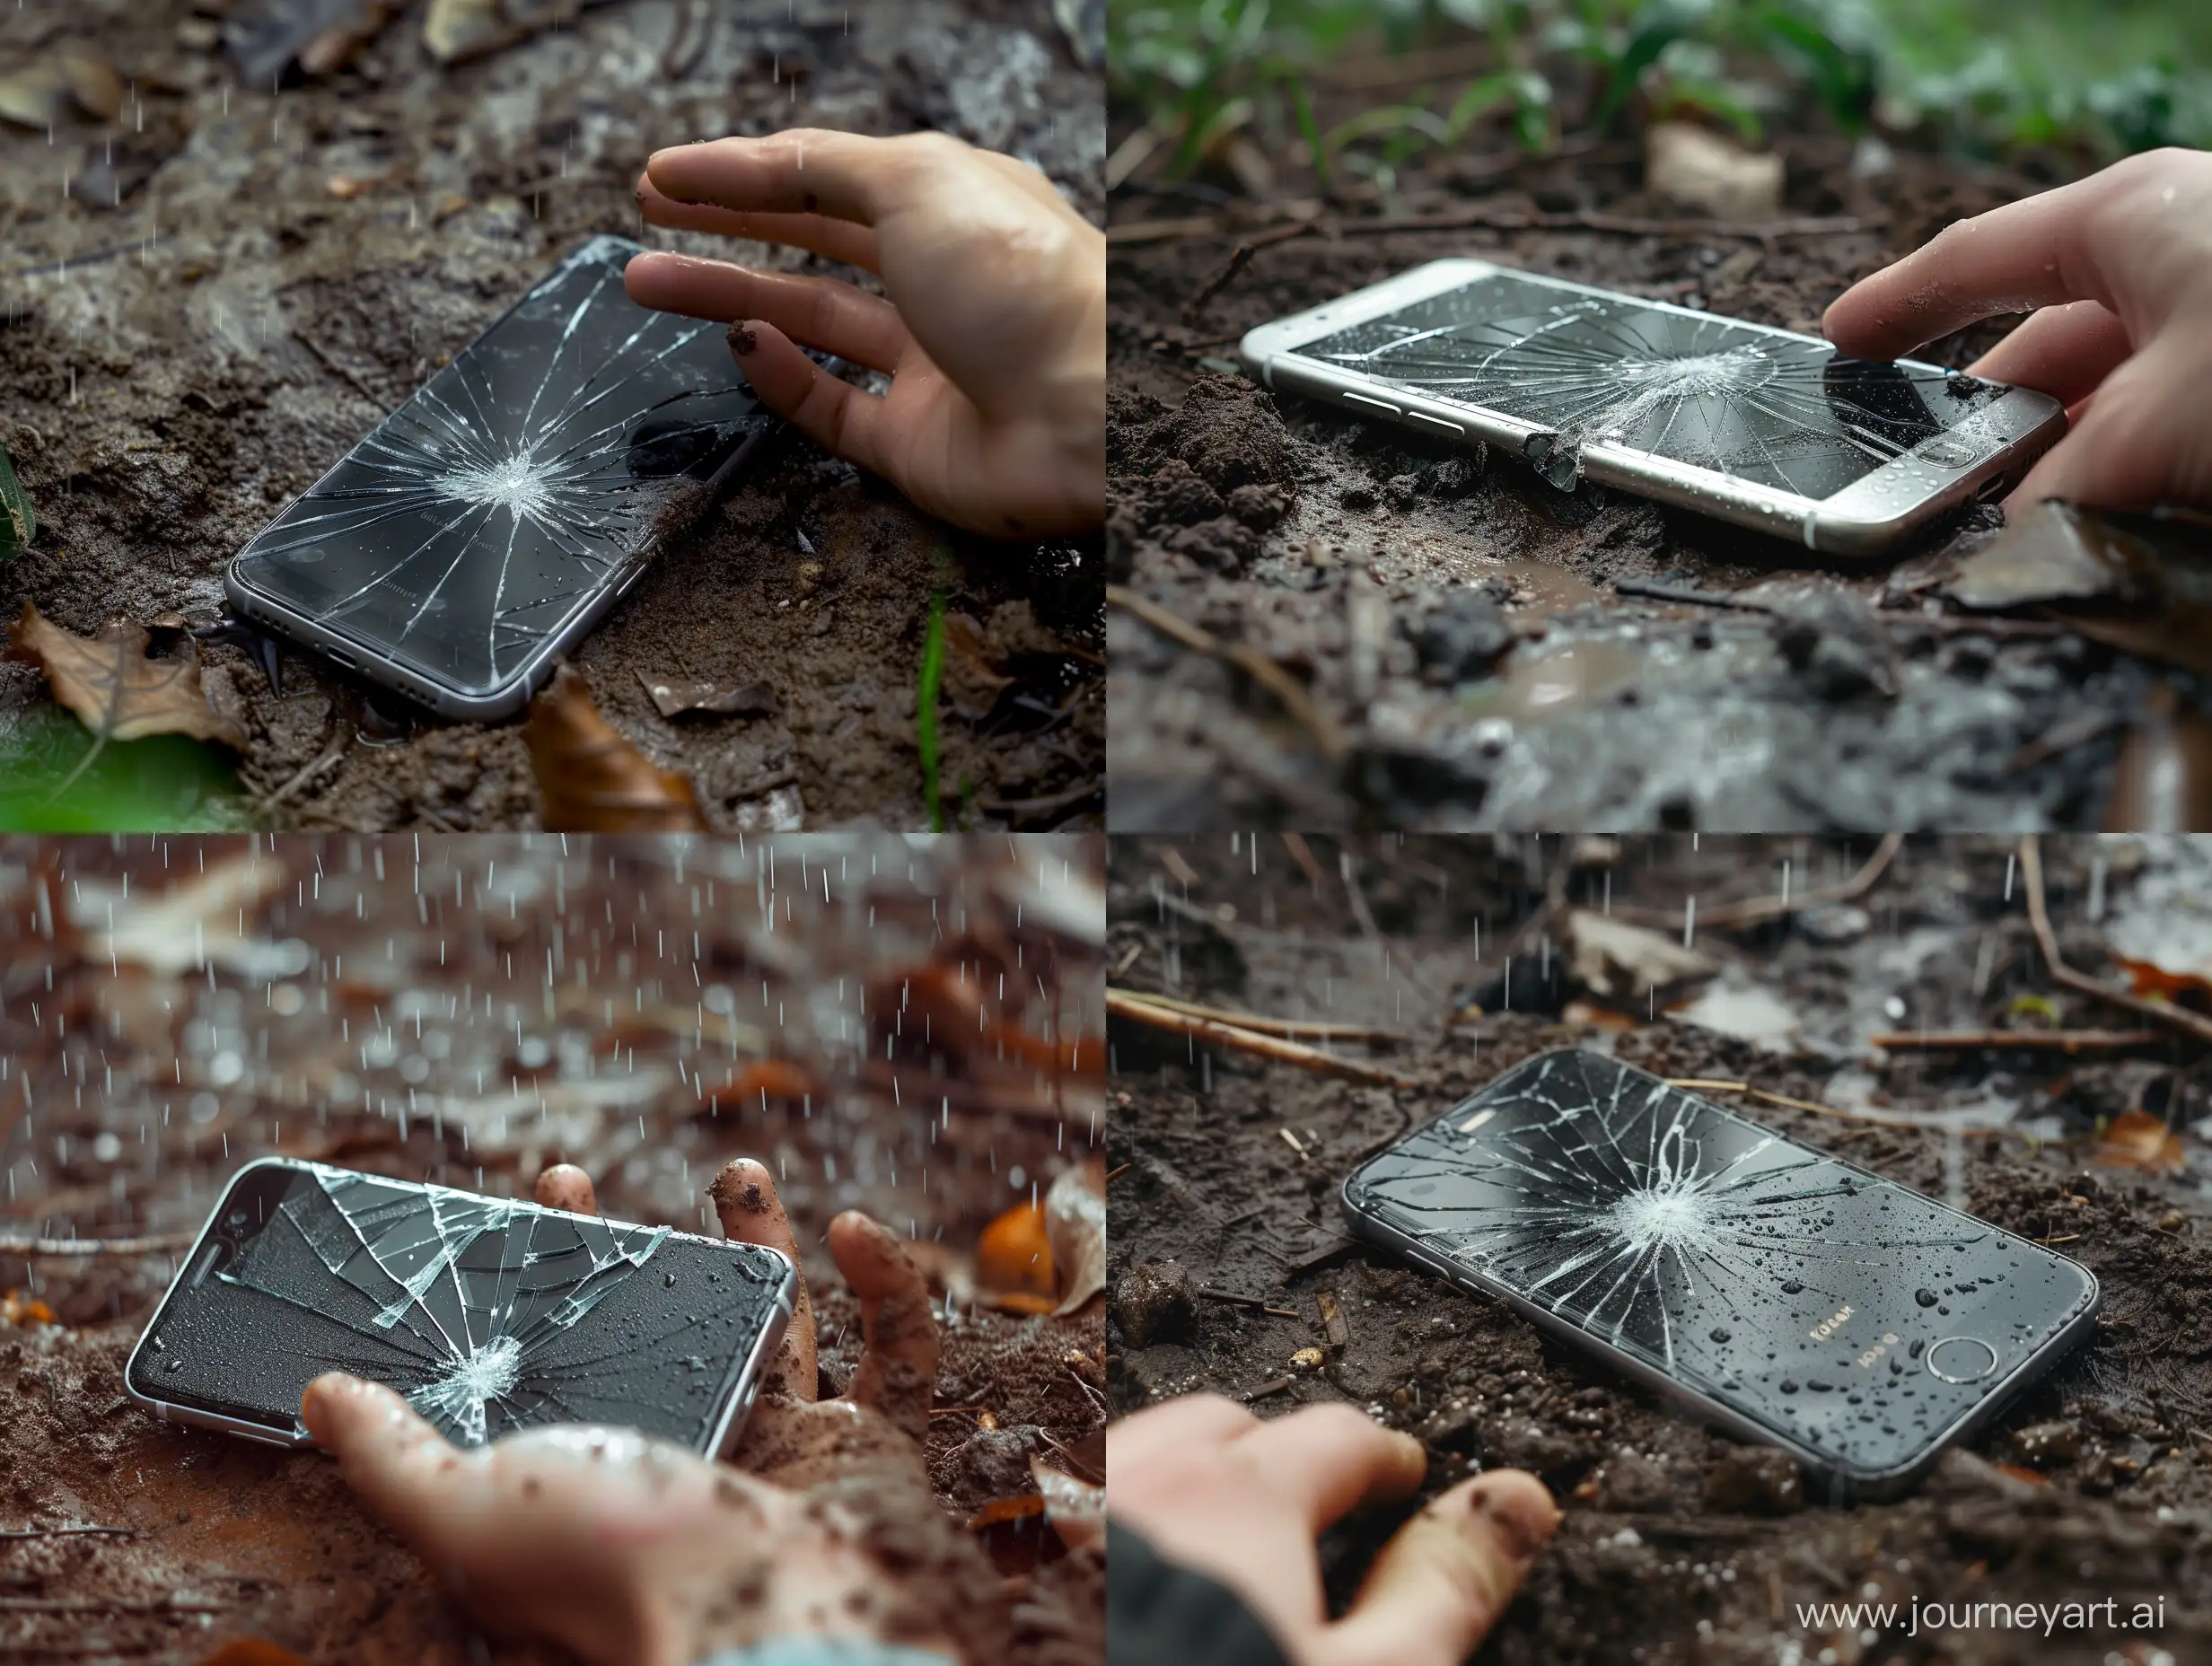 broken mobile phone with craked screenglass lays on the ground in dirt while raining, man hand is neaby partially seen, close-up view, realistic style, photo taked by Kodak 35mm